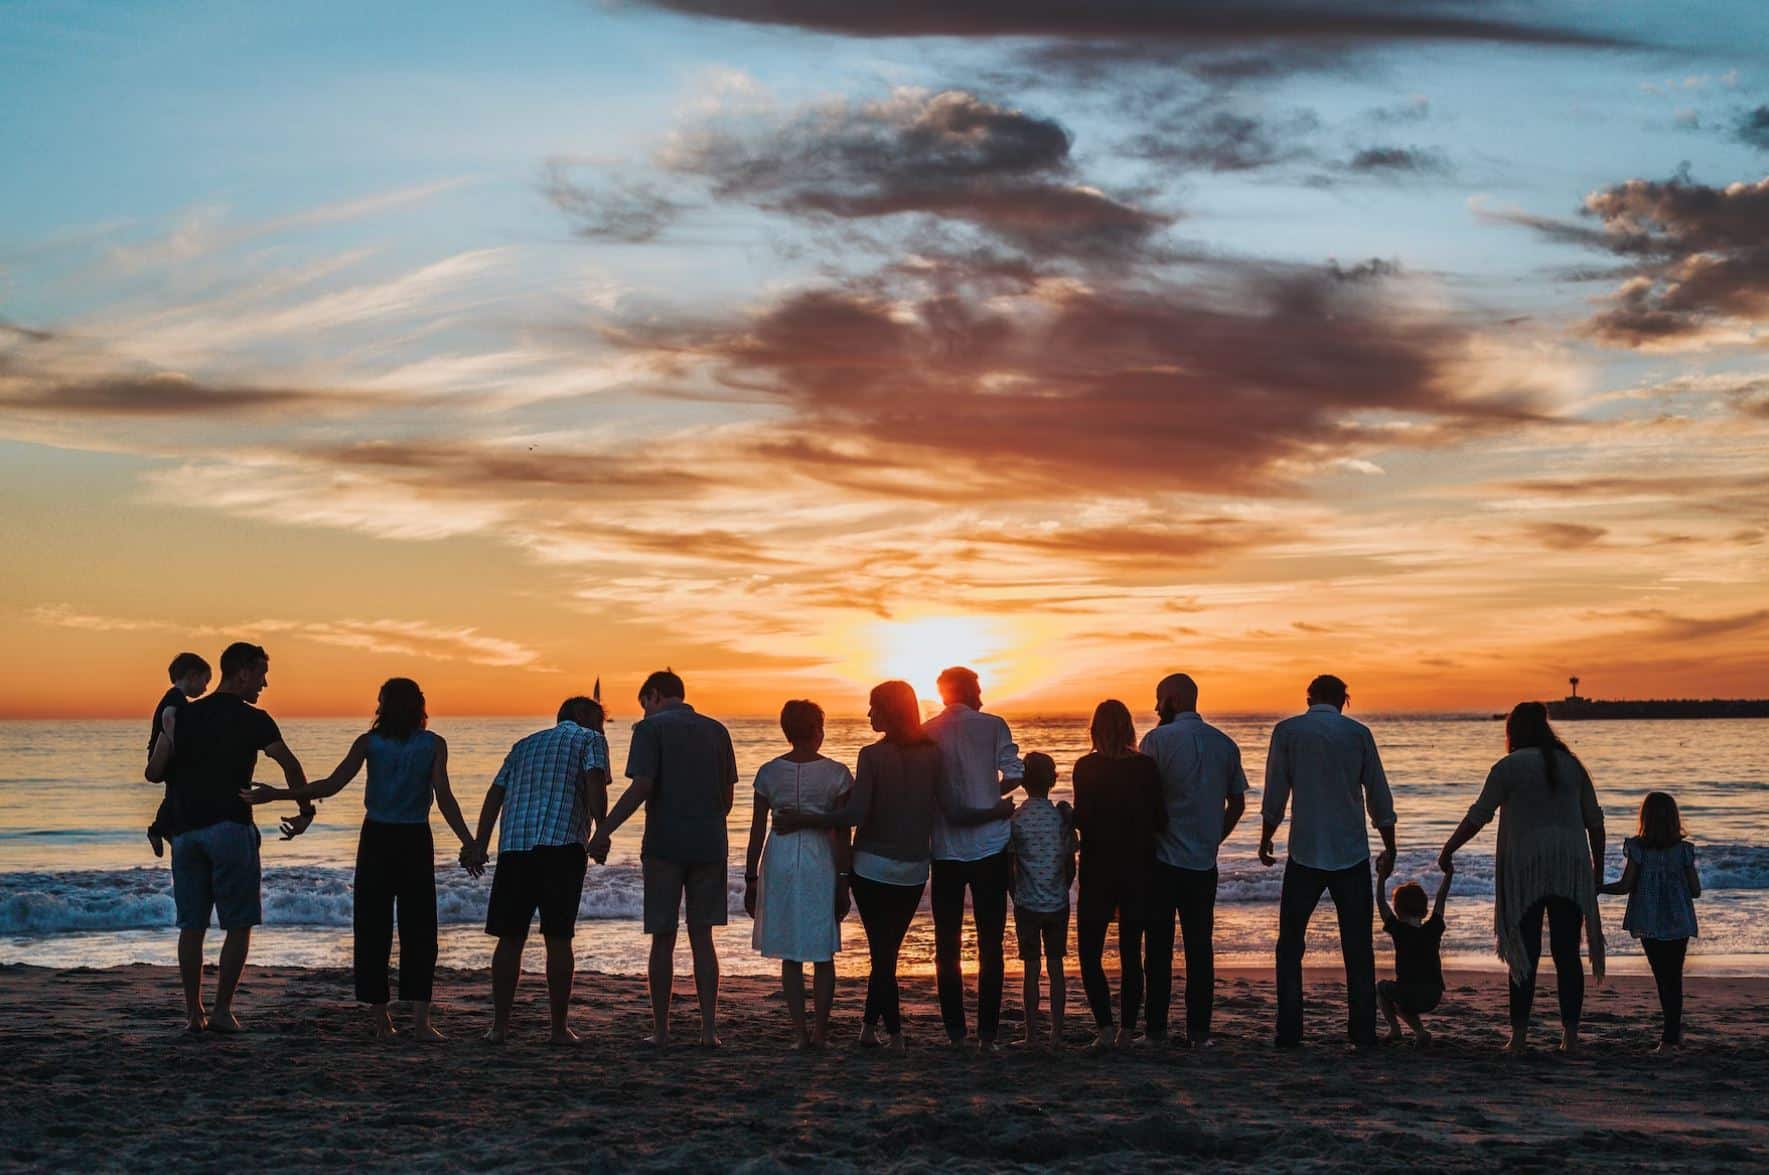 A group of people, including adults and children, stand in a line holding hands on a beach, facing a sunset over the ocean, embodying the harmony and teamwork found in an effective ISO management system.